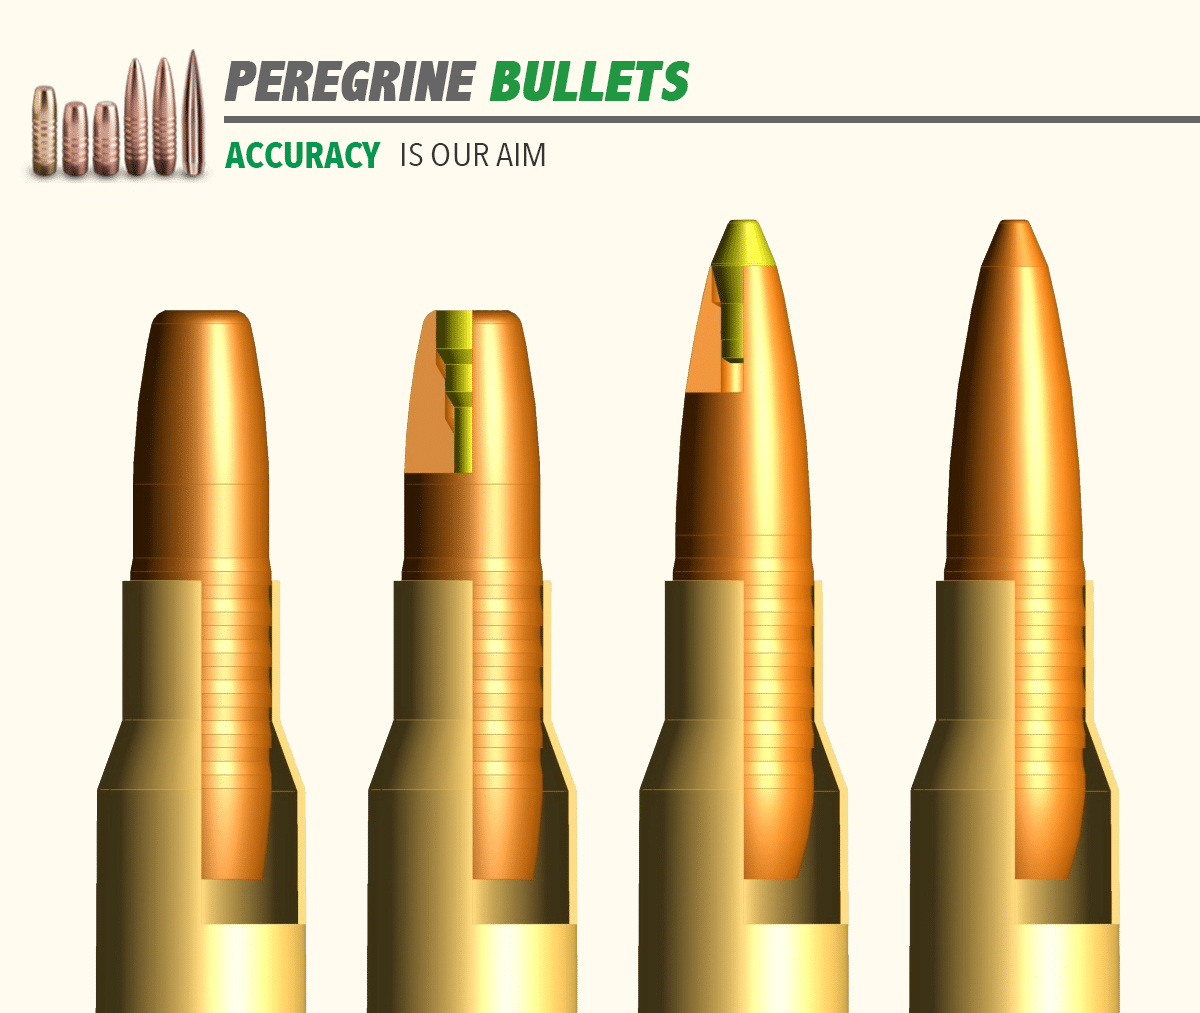 How to correctly seat peregrine bullets